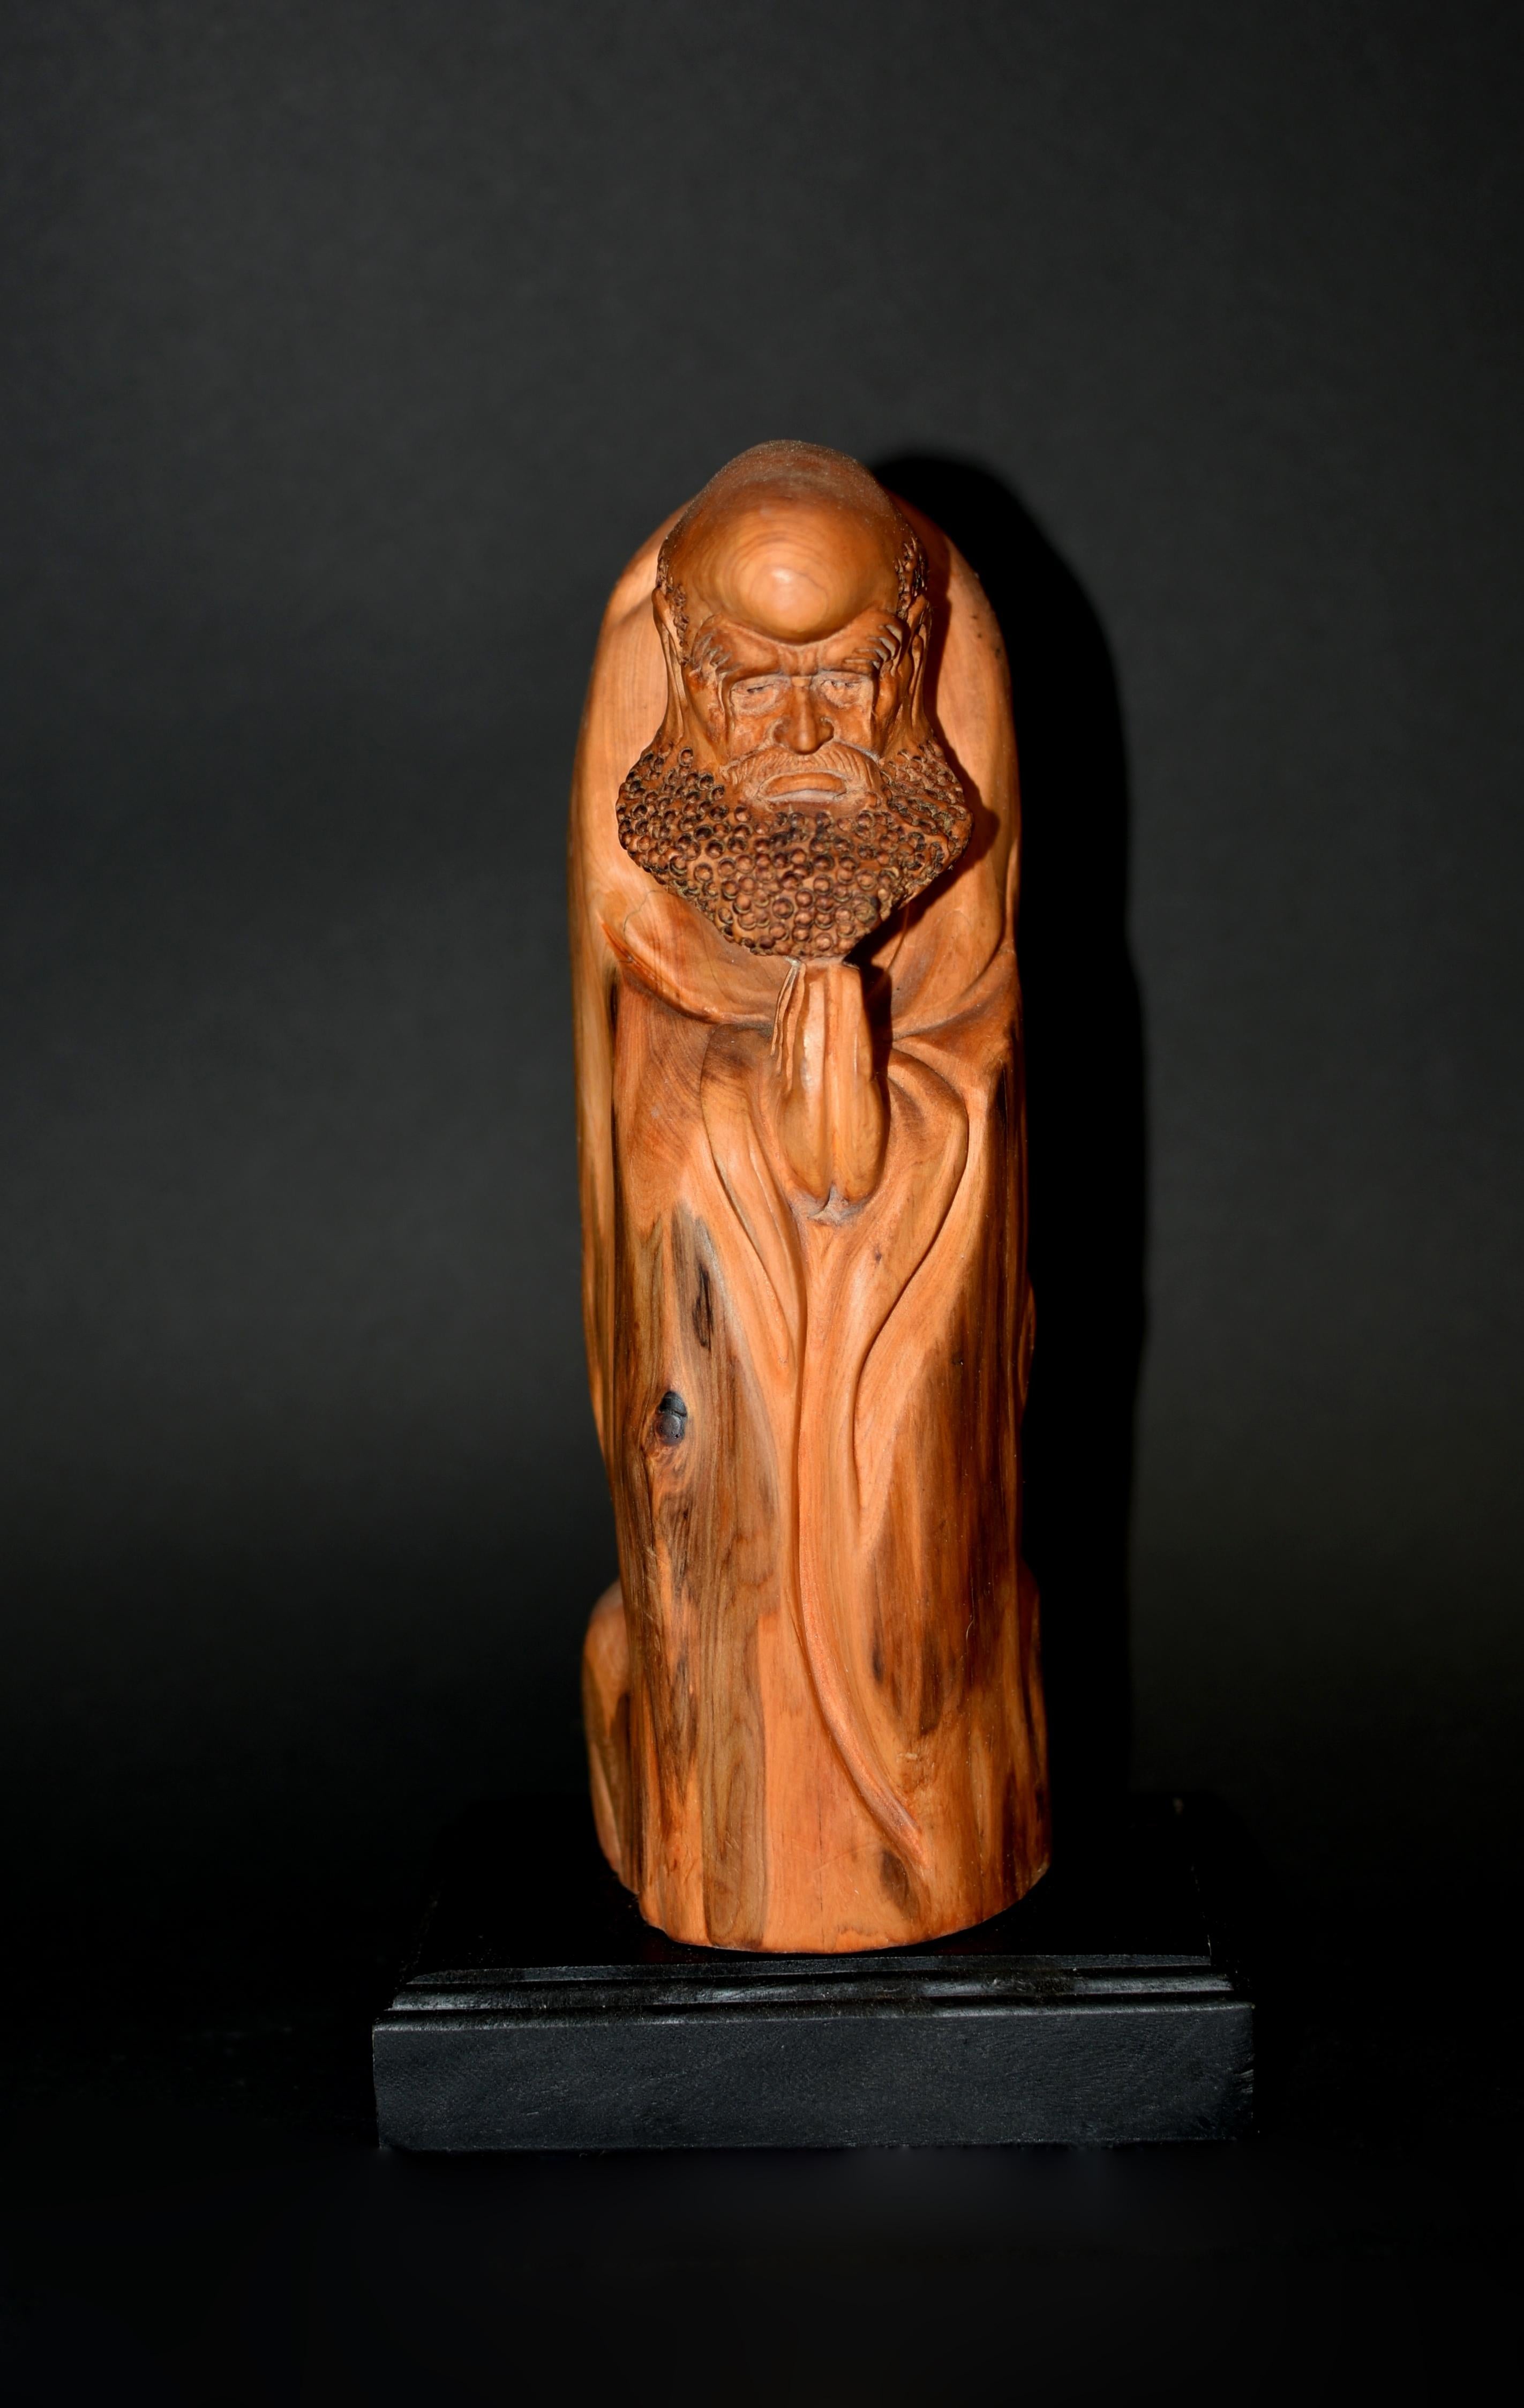 A beautiful solid camphor wood statue of the legendary Buddhist monk Bodhidharma (Damo), who is believed to be the saint who introduced Buddhism to China, Damo represents 